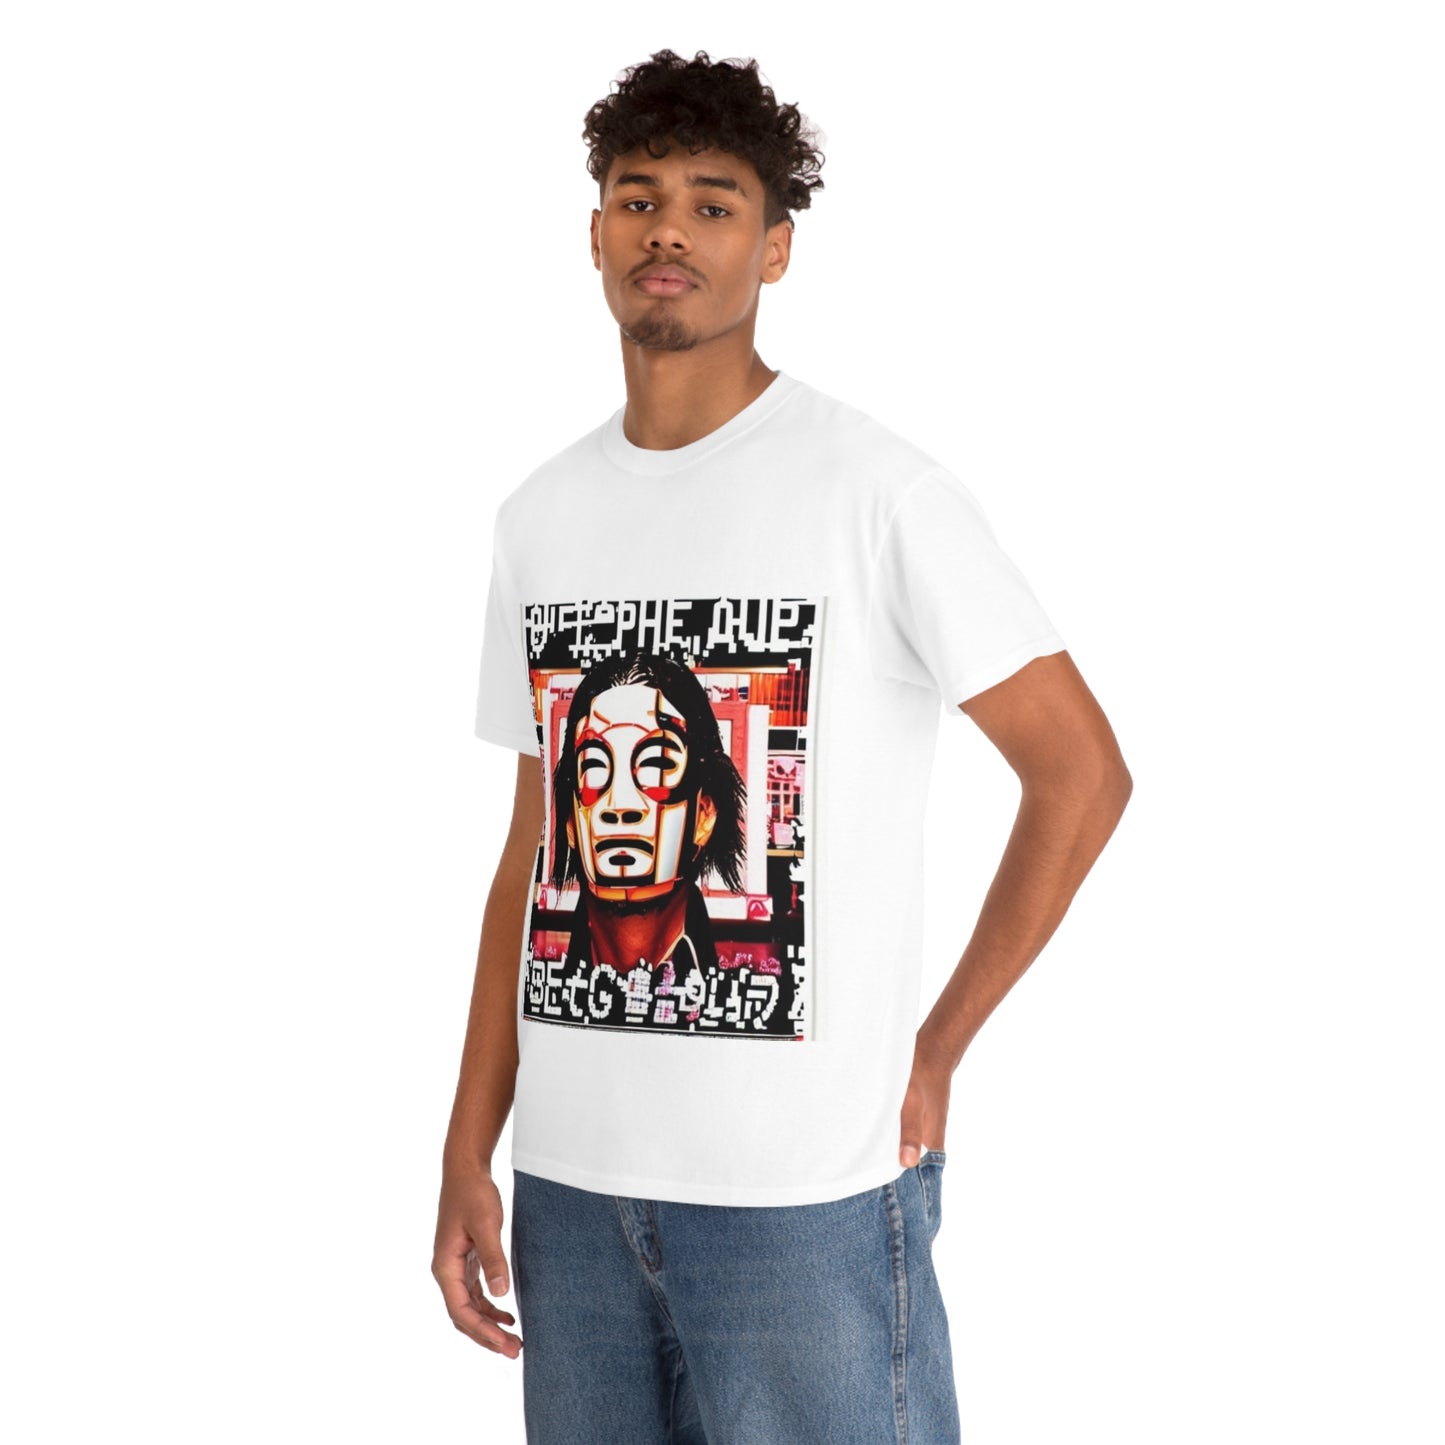 Head To_Obey T-Shirt Collection